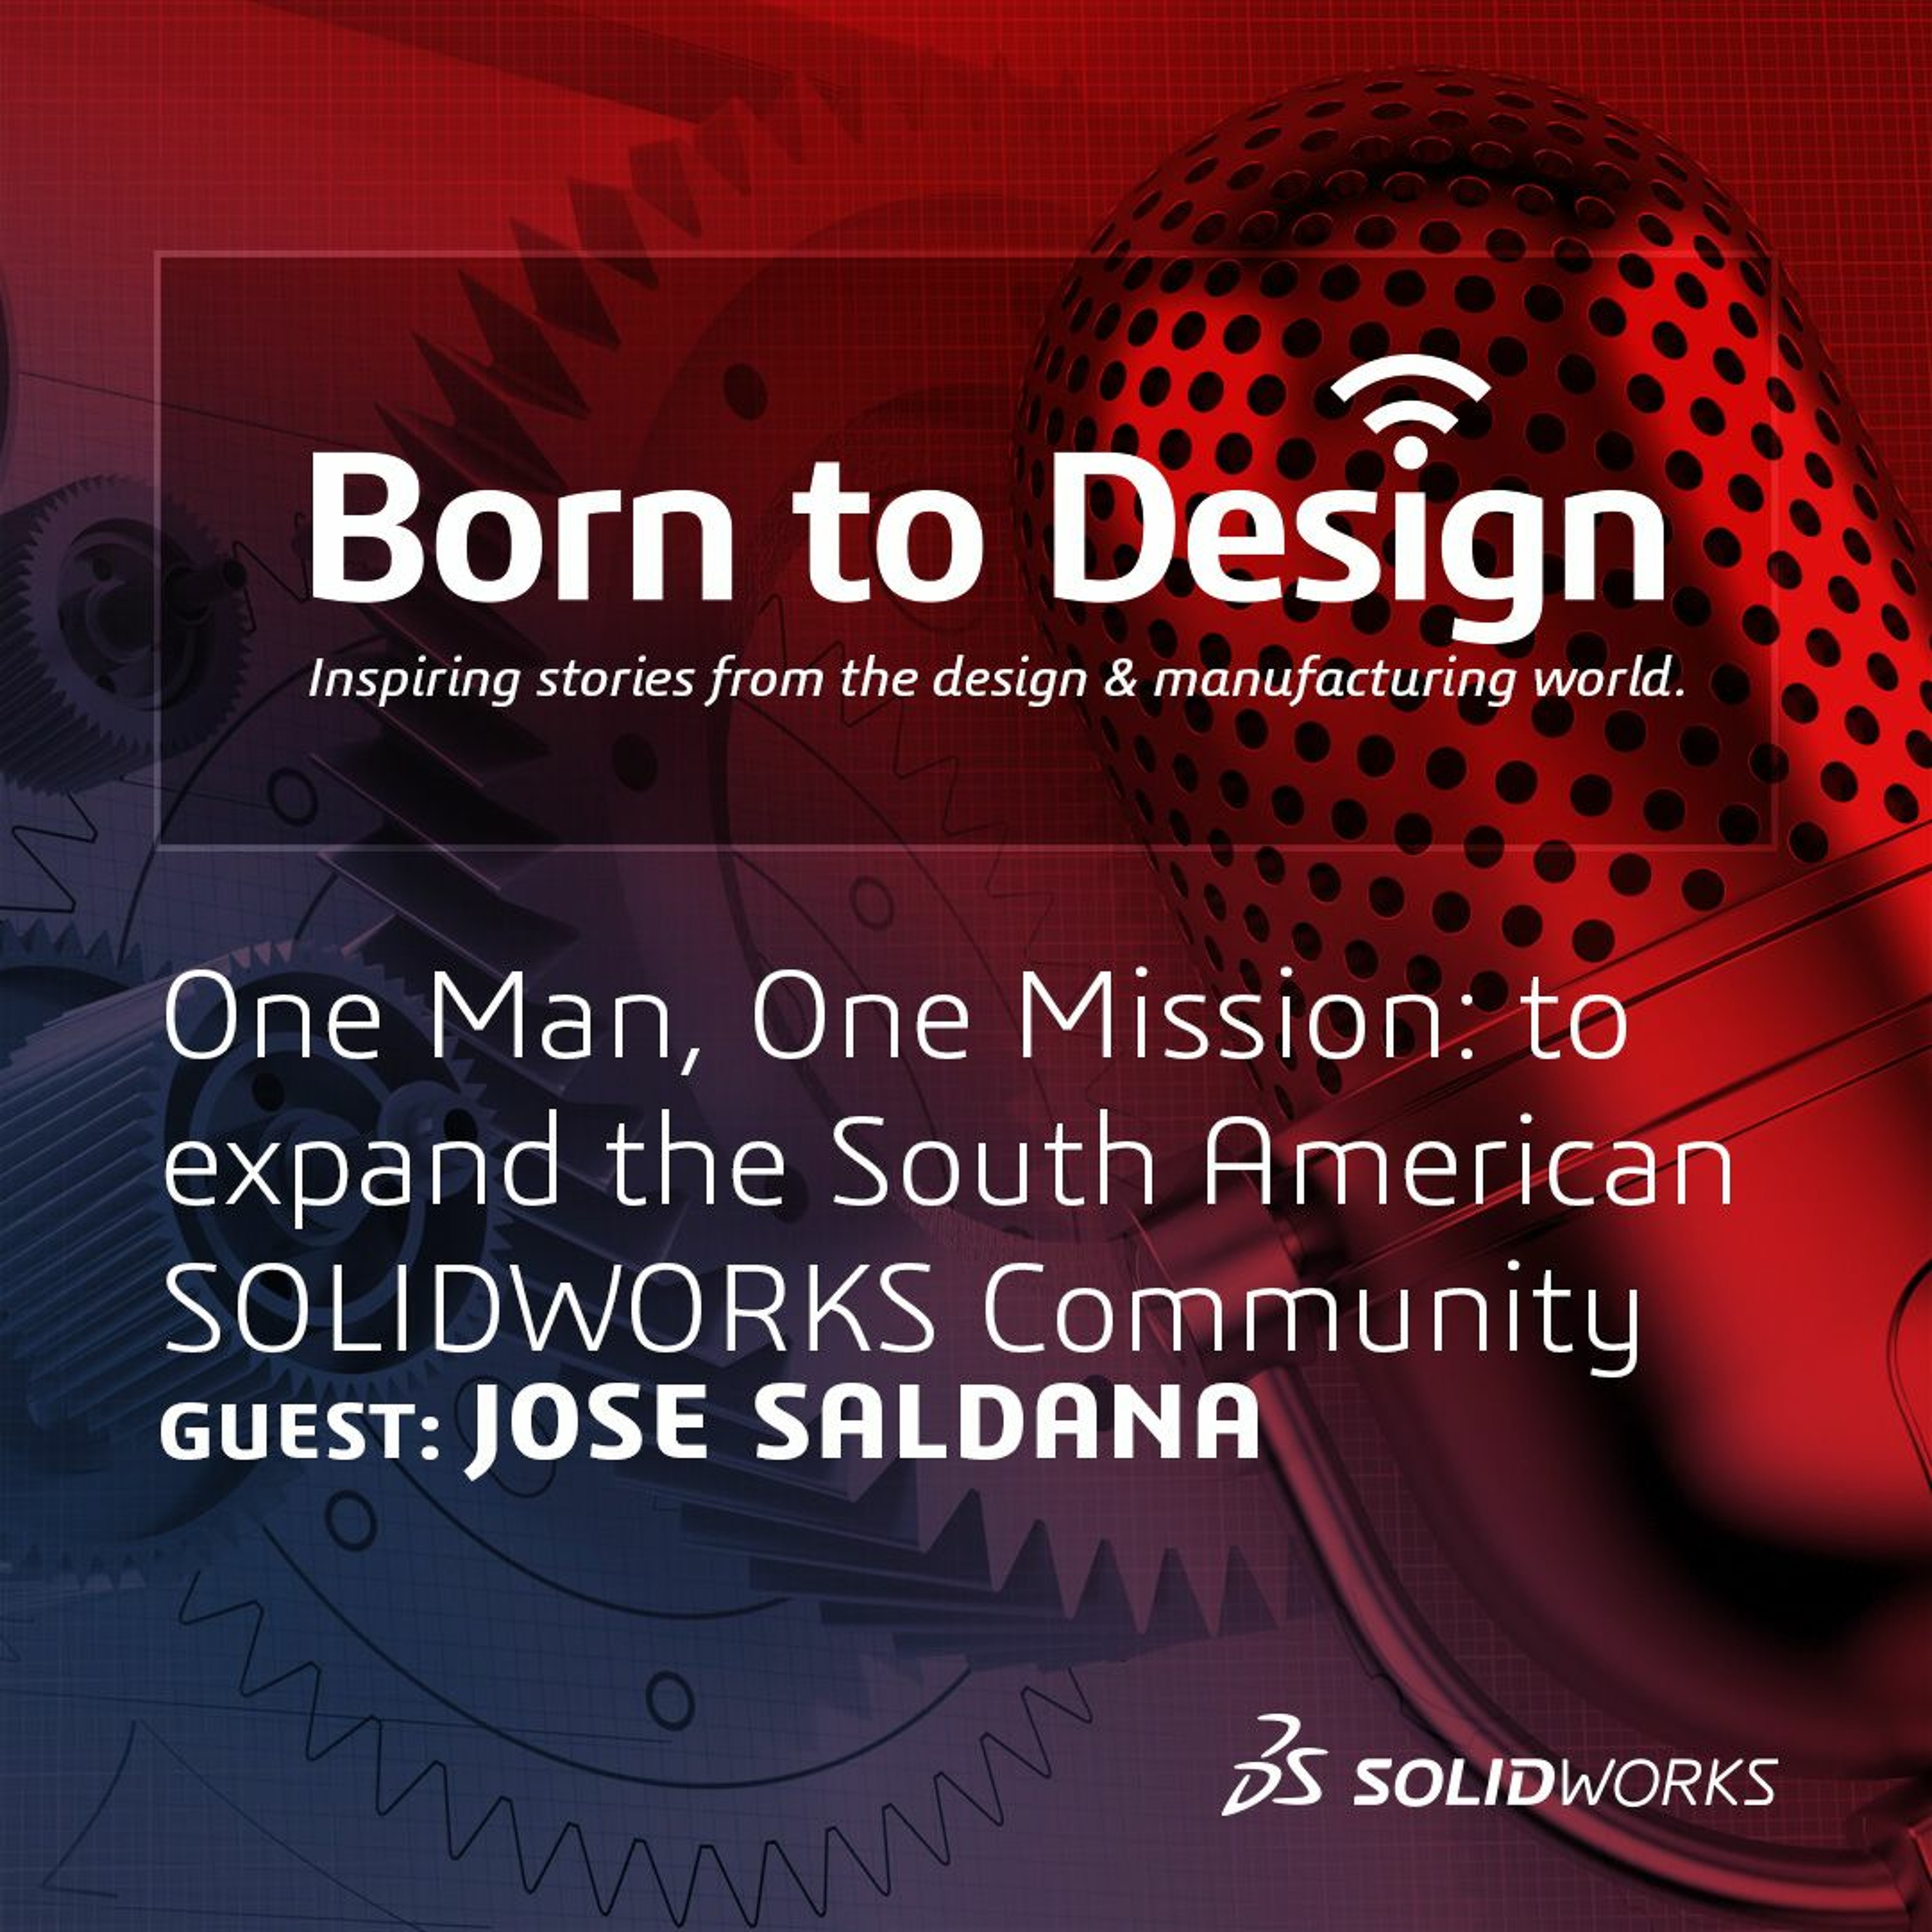 48- One Man, One Mission: to expand the South American SOLIDWORKS Community